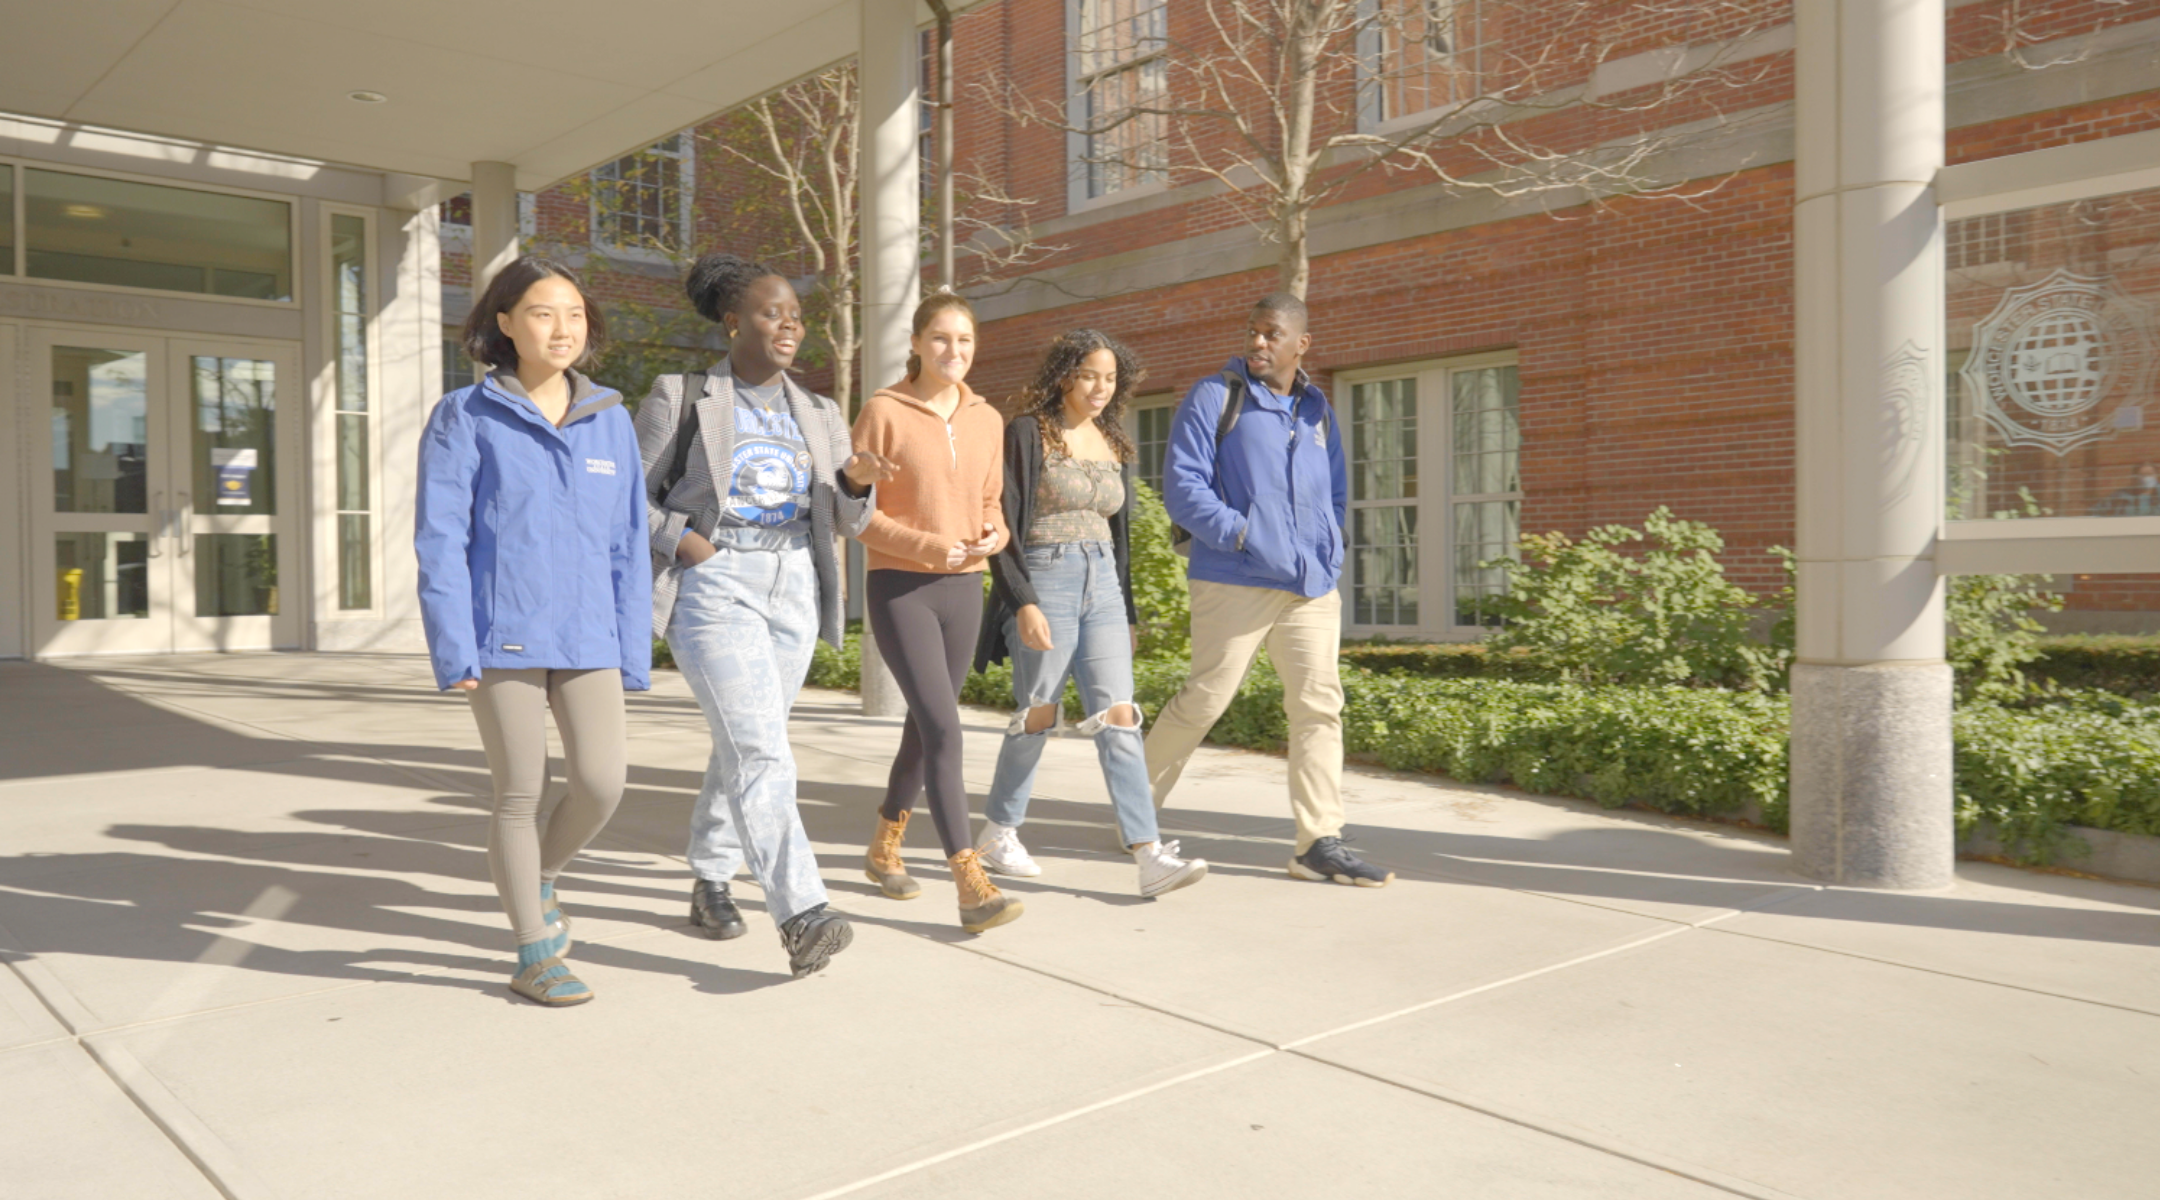 5 worcester state students talking together as they walk through campus